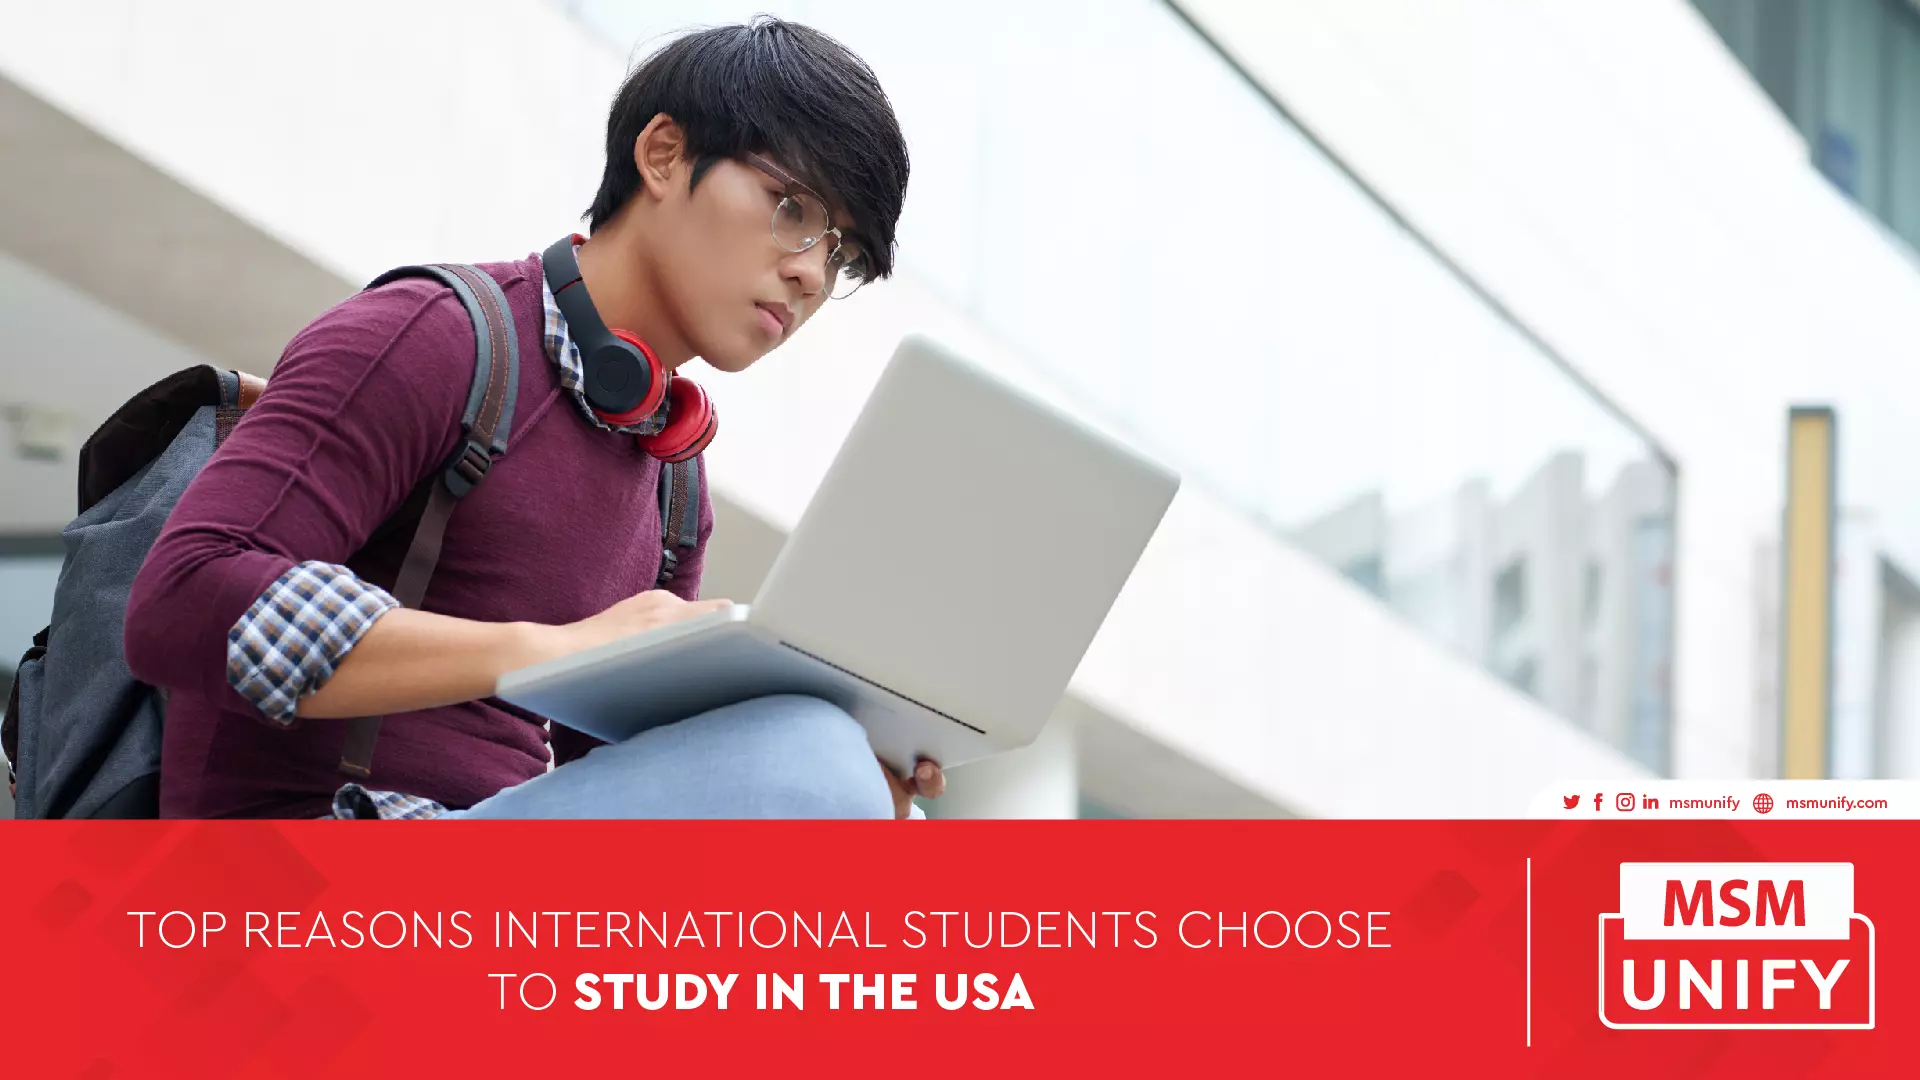 102822 MSM Unify Top Reasons International Students Choose to Study in the USA 01